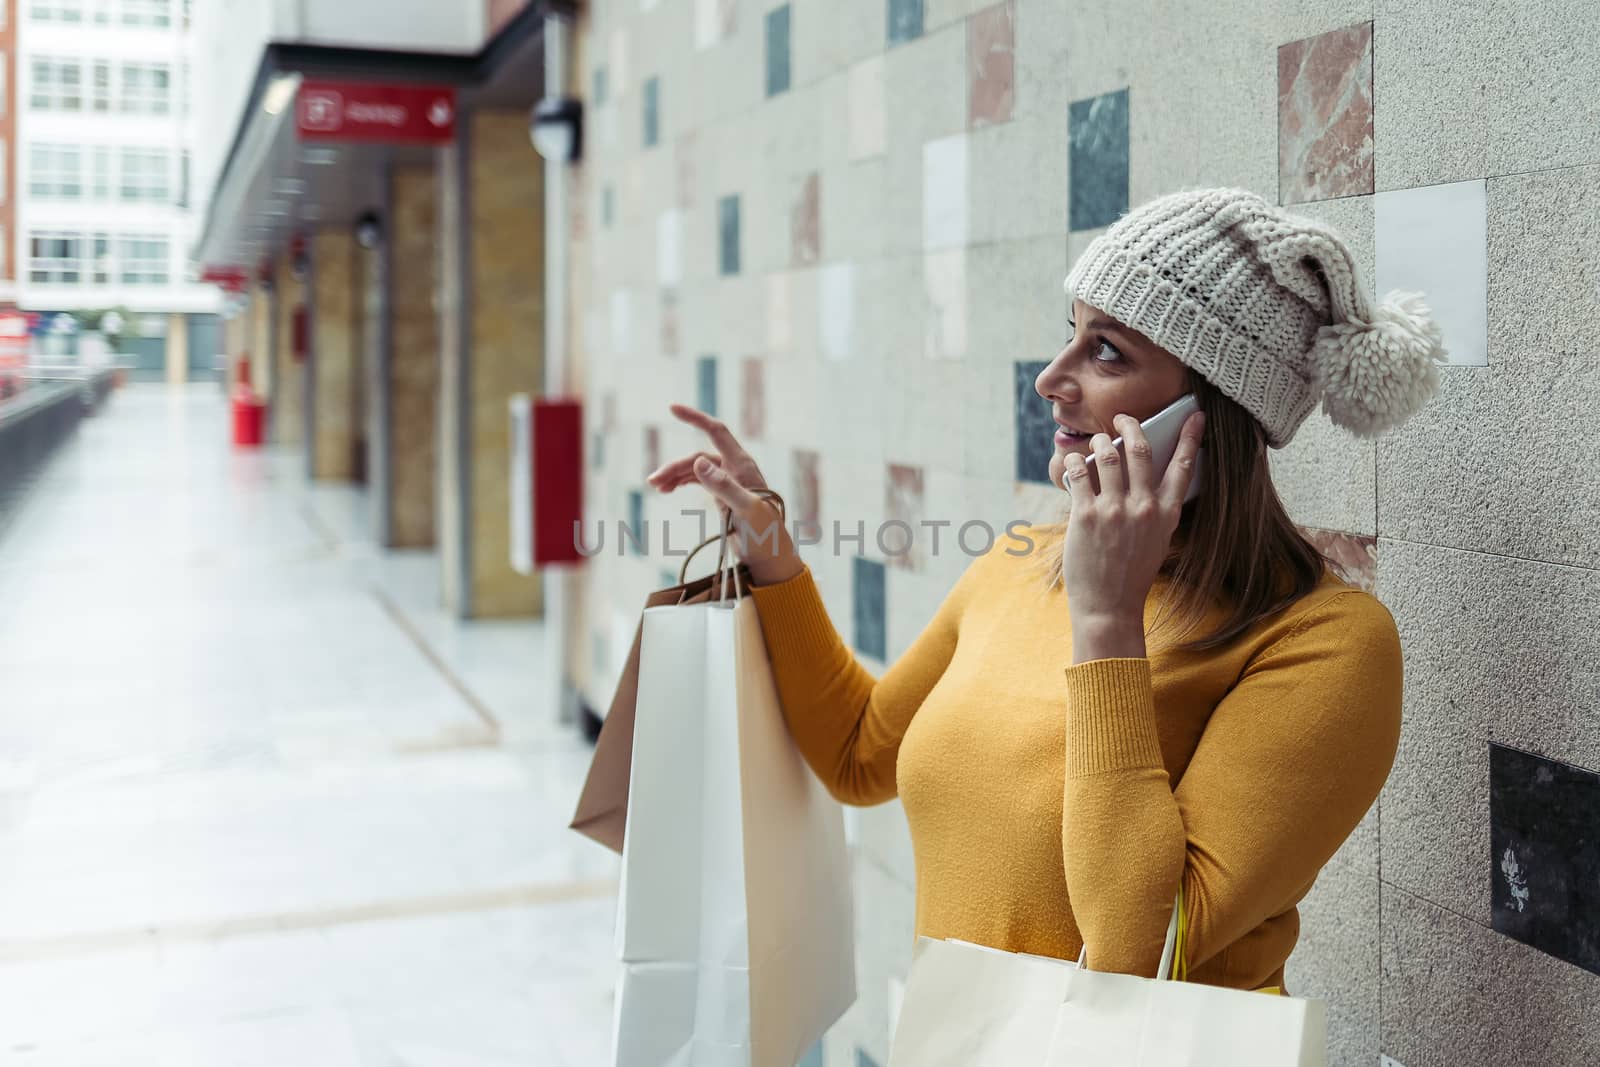 Adult woman wearing a yellow sweater and wool cap talking on her mobile phone while holding shopping bags.